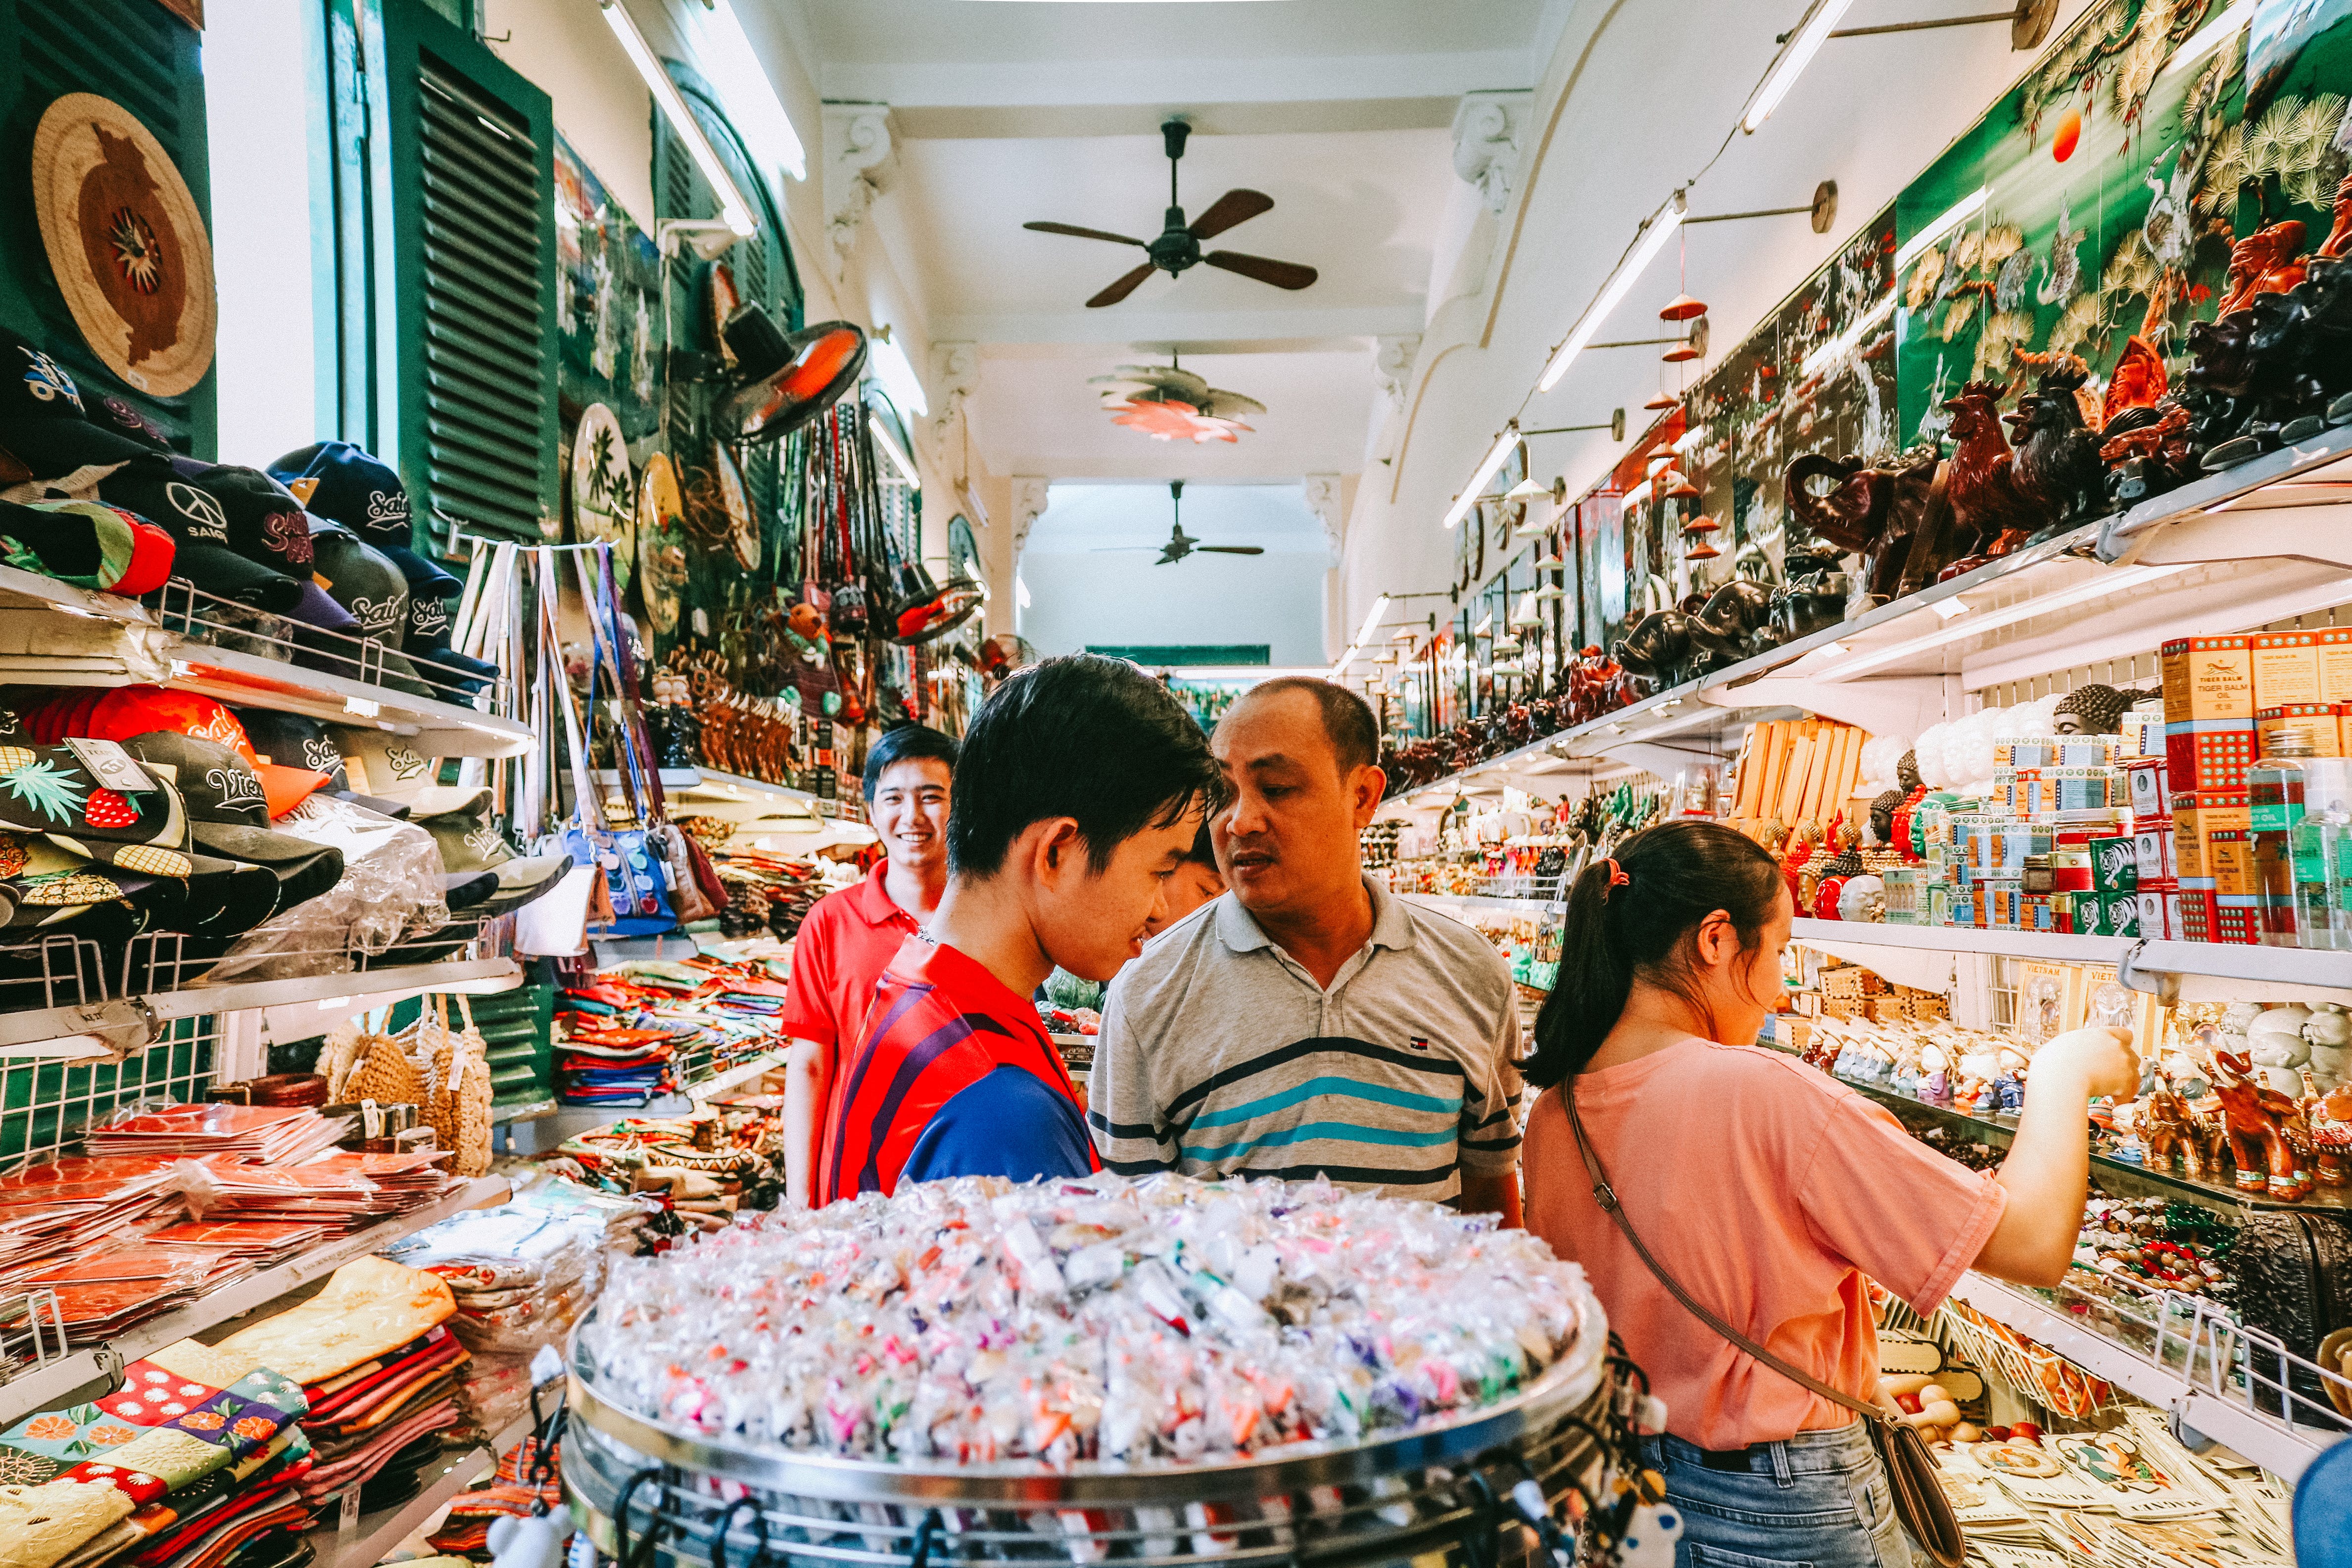 People inside a store. | Source: Pexels